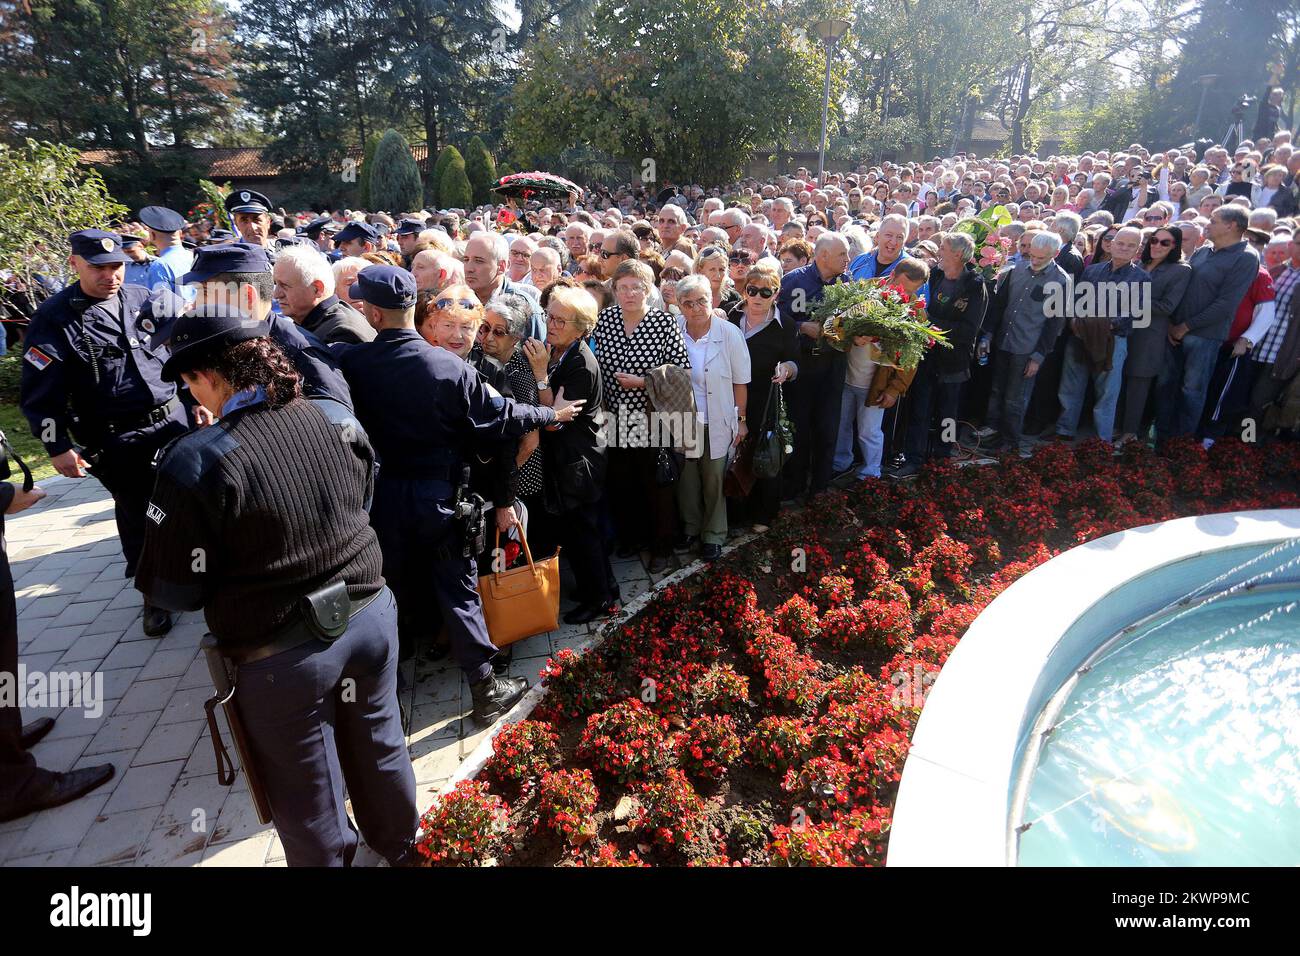 26.10.2013., Belgrade, Serbia - Jovanka Broz, former First Lady of Yugoslavia and Tito's widow, is buried after dying of heart failure earlier this month. Jovanka Broz died of heart failure in a Belgrade hospital on Oct. 20, at the age of 88. Thousands of mourners, many from other former Yugoslav republics, gave Broz a final salute as her coffin, covered with red flowers, was carried into the "House of Flowers" compound where she was buried next to her husband. Photo: Marko Mrkonjic/PIXSELL Stock Photo